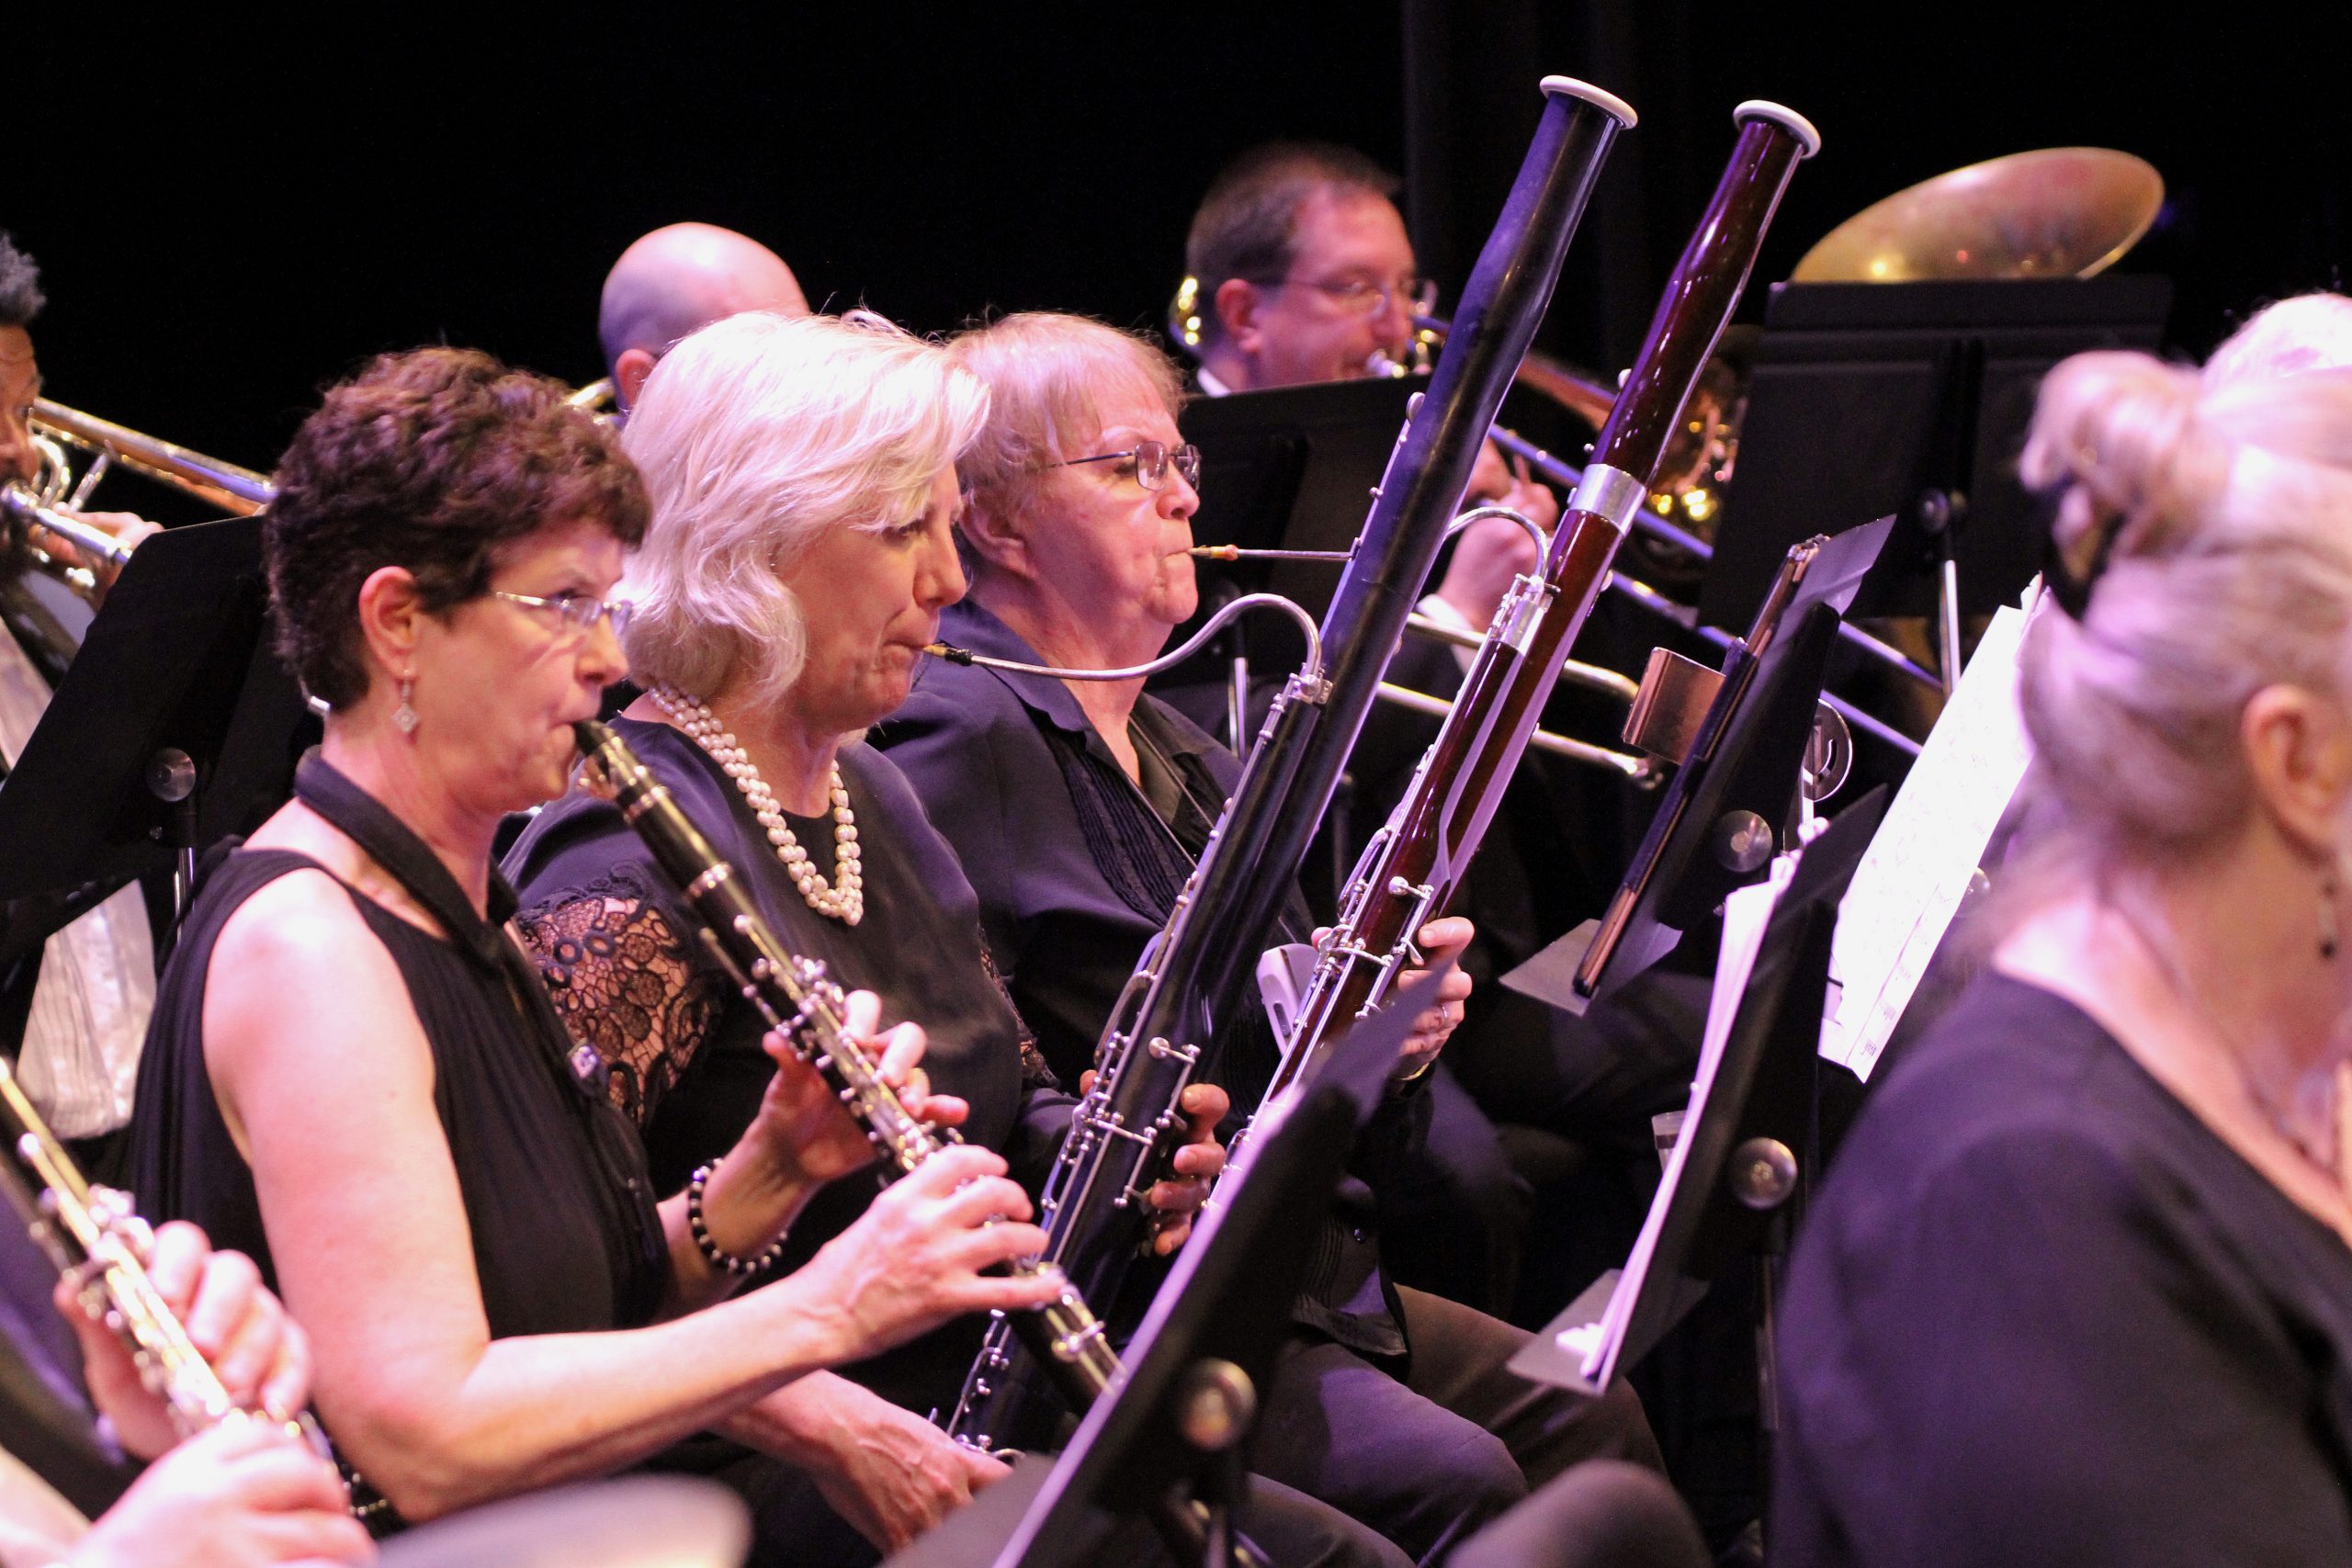 women and men seated playing playing woodwind instruments watching their music on stands in front of them